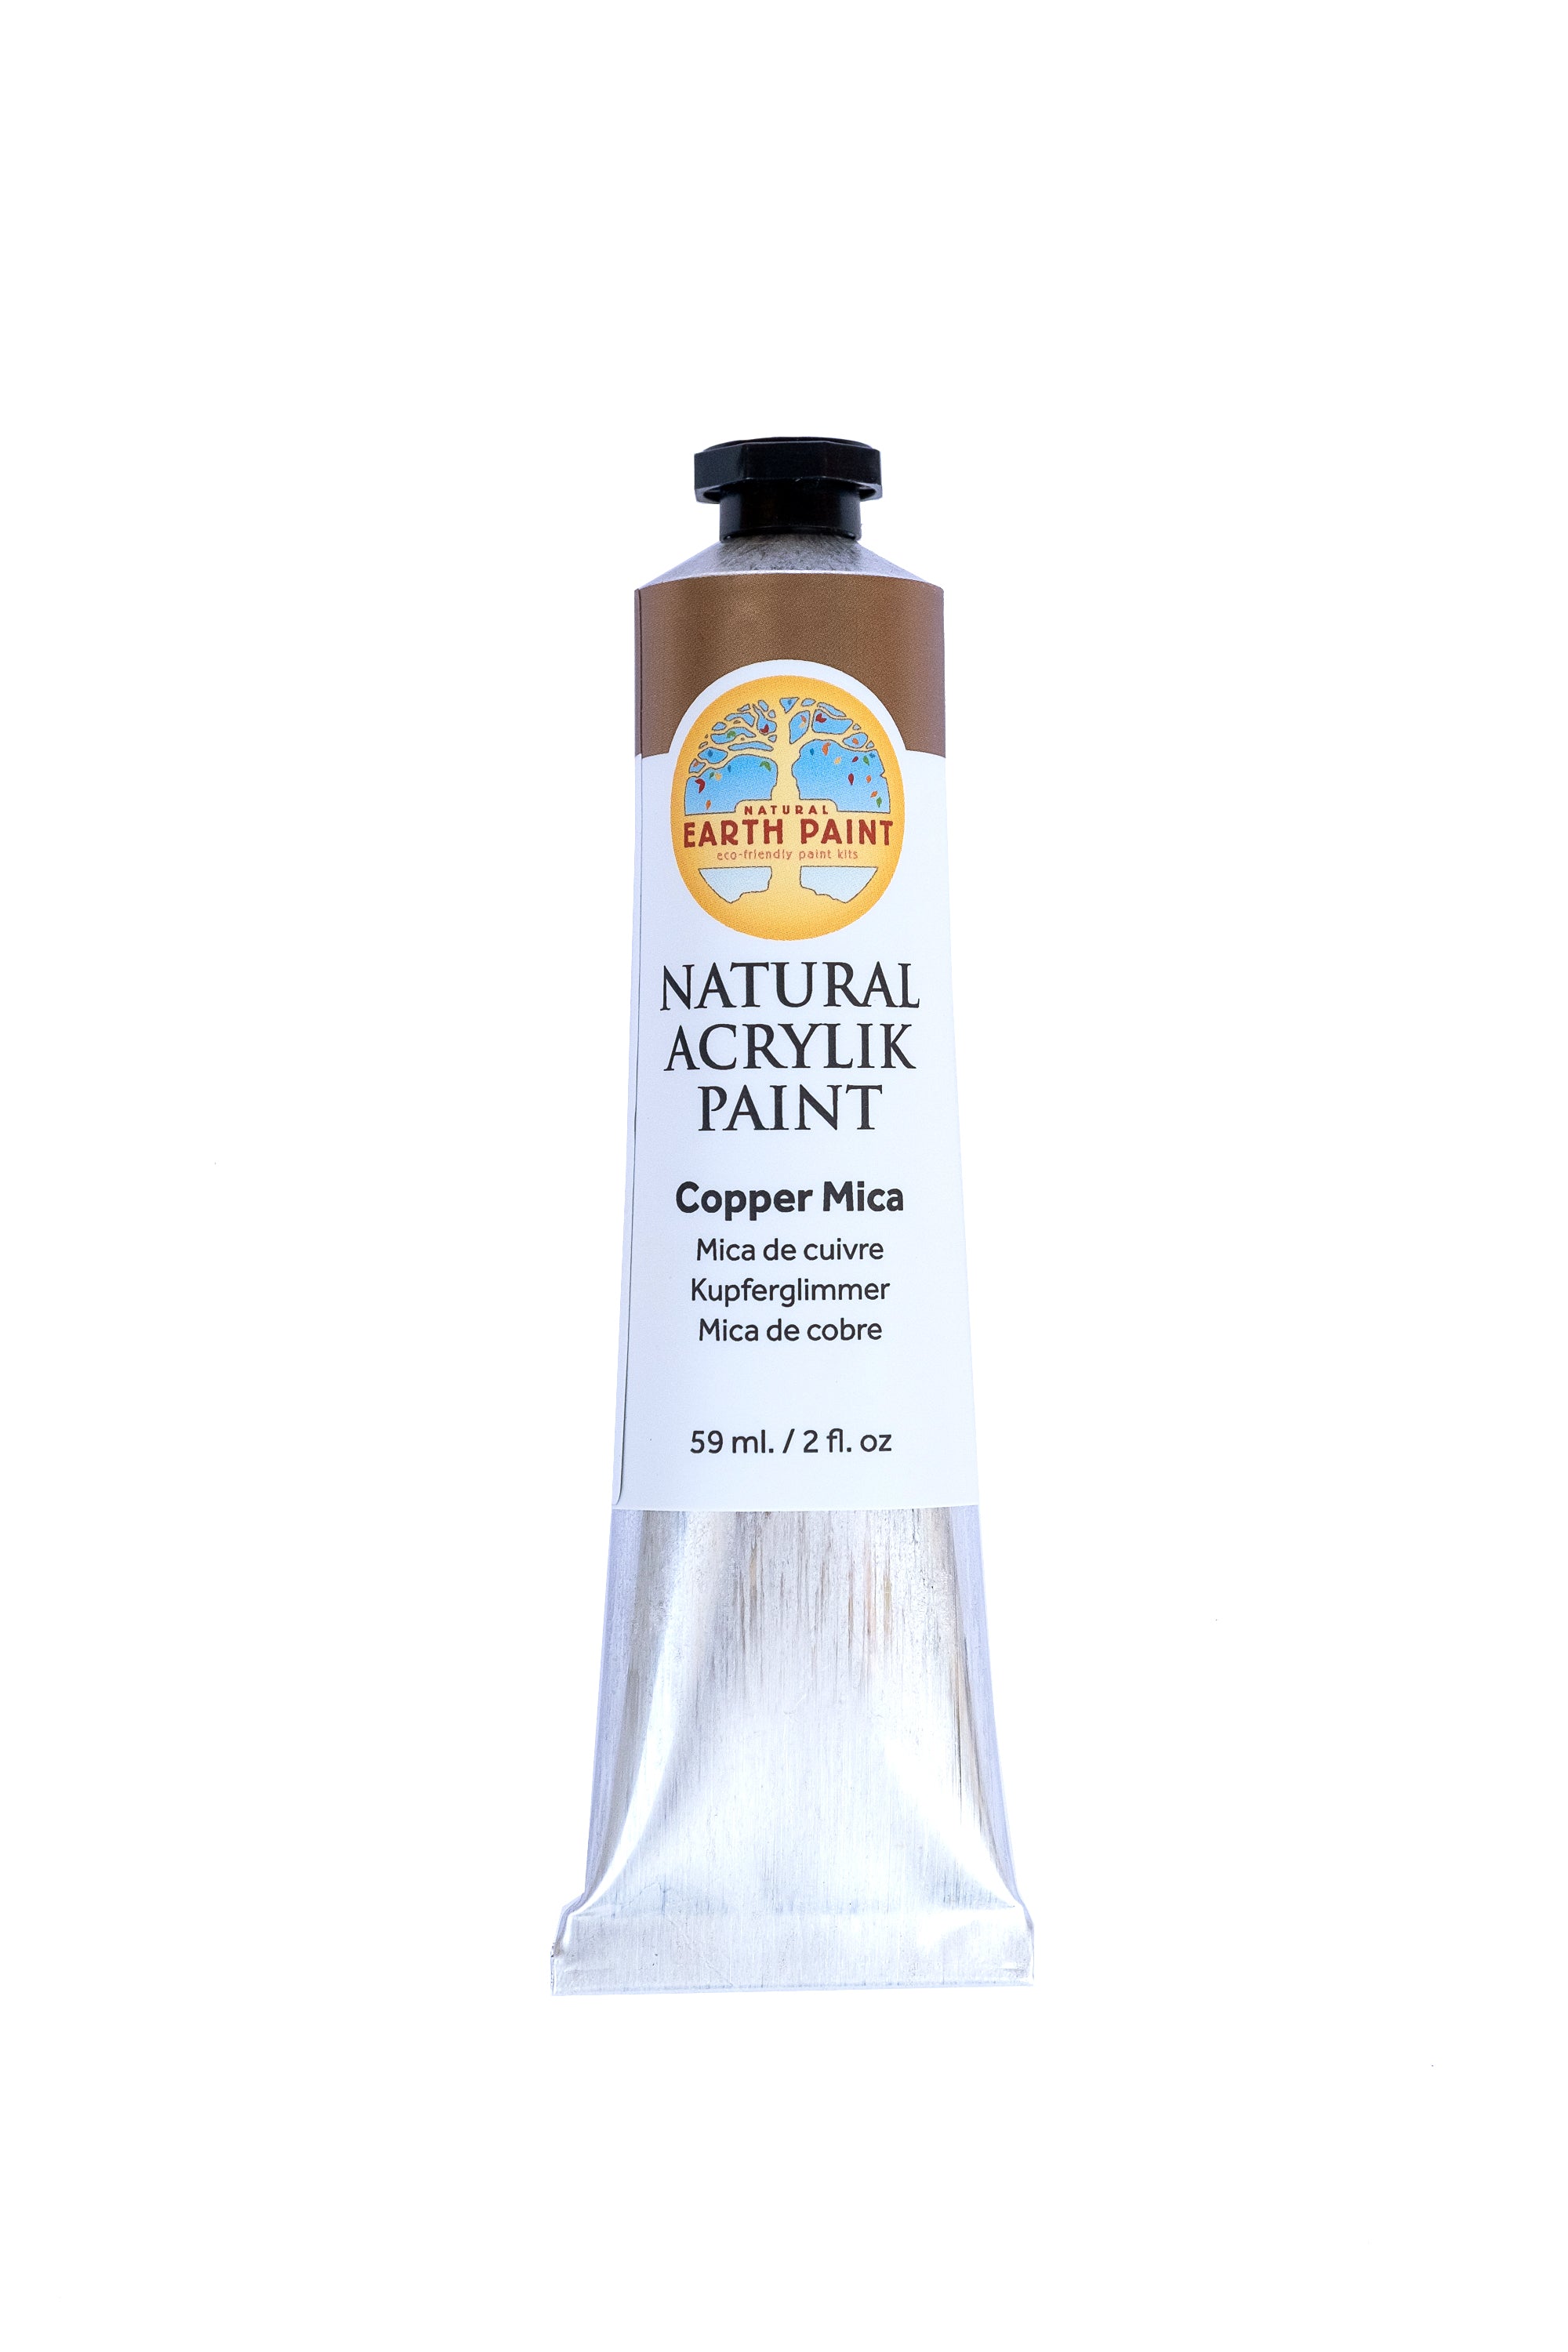 Natural Acrylik Paint™ - Individual Tubes-acrylic, acrylic paint, art, arts and craft, colors from the earth, earth colors, earth paint, earth pigments, eco art supplies, Eco Artist Paints, eco friendly paints, eco-friendly art supplies, eco-friendly paint, Fine Art Supplies Products, natural acrylic, natural artist paints, natural earth colors, natural paint, natural paints, non-toxic paint, nontoxic artist paints, nontoxic artist supplies, nontoxic paints, paint, sustainable art supplies-Copper Mica-Natur